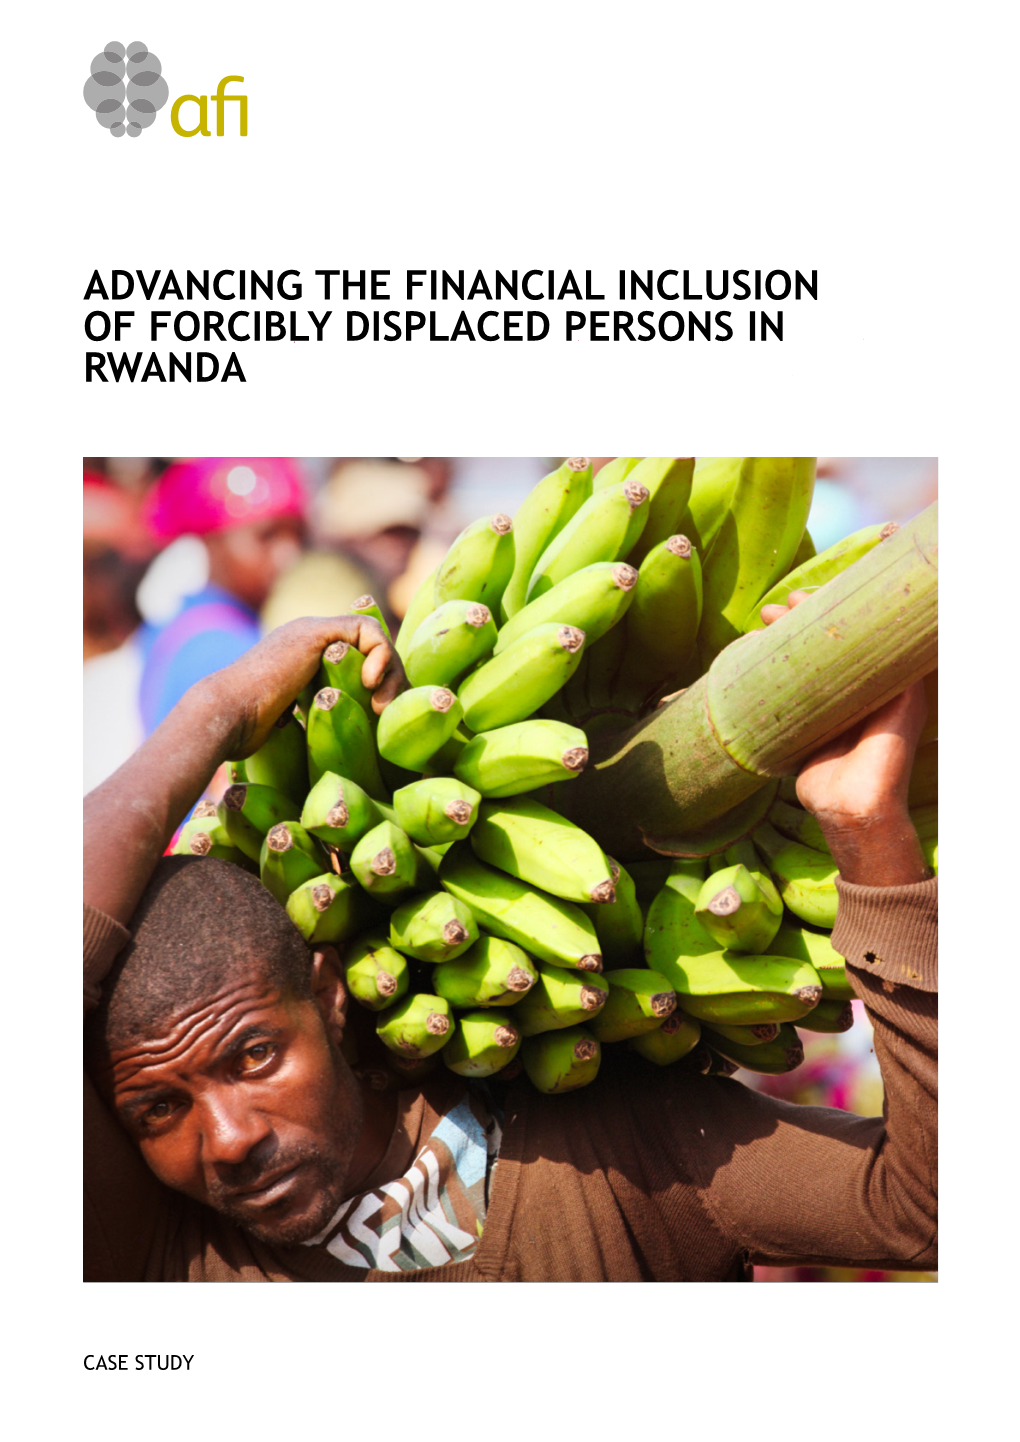 Advancing the Financial Inclusion of Forcibly Displaced Persons in Rwanda